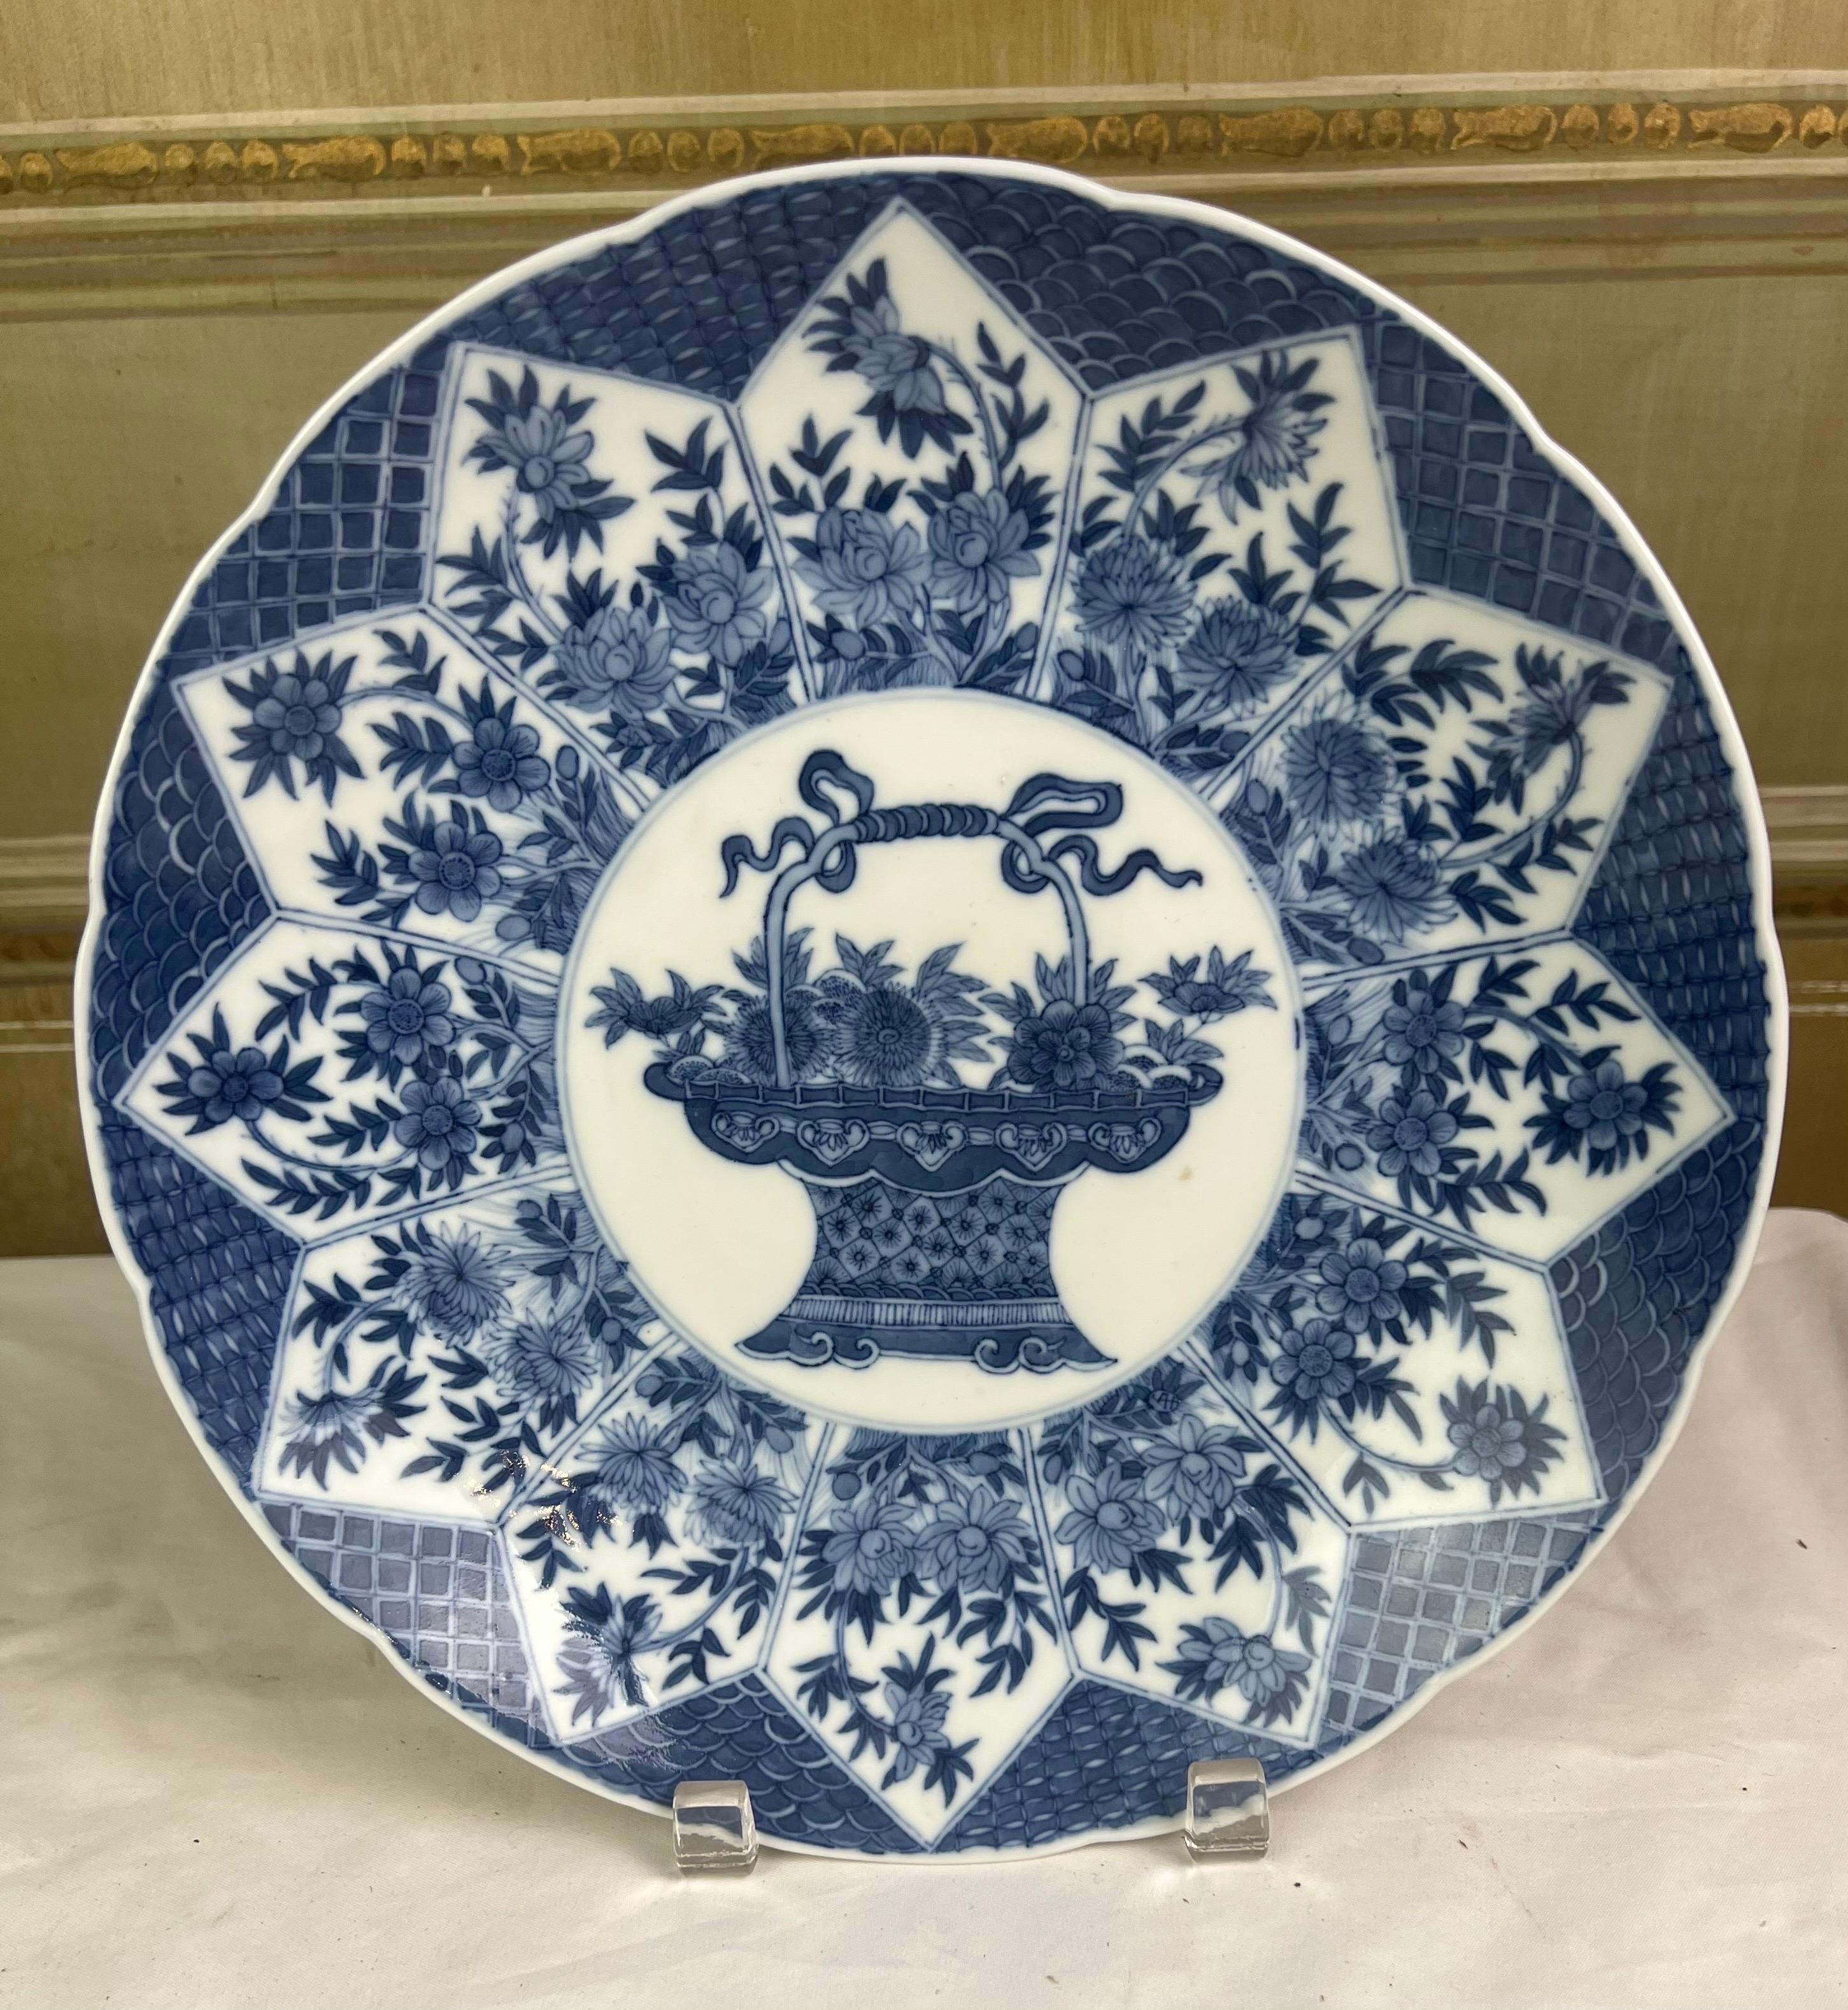 Qing Dynasty style under-glazed platter featuring a basket of flowers
Beautifully hand painted Chinese porcelain with varying shades of cobalt blue
Excellent condition.  


